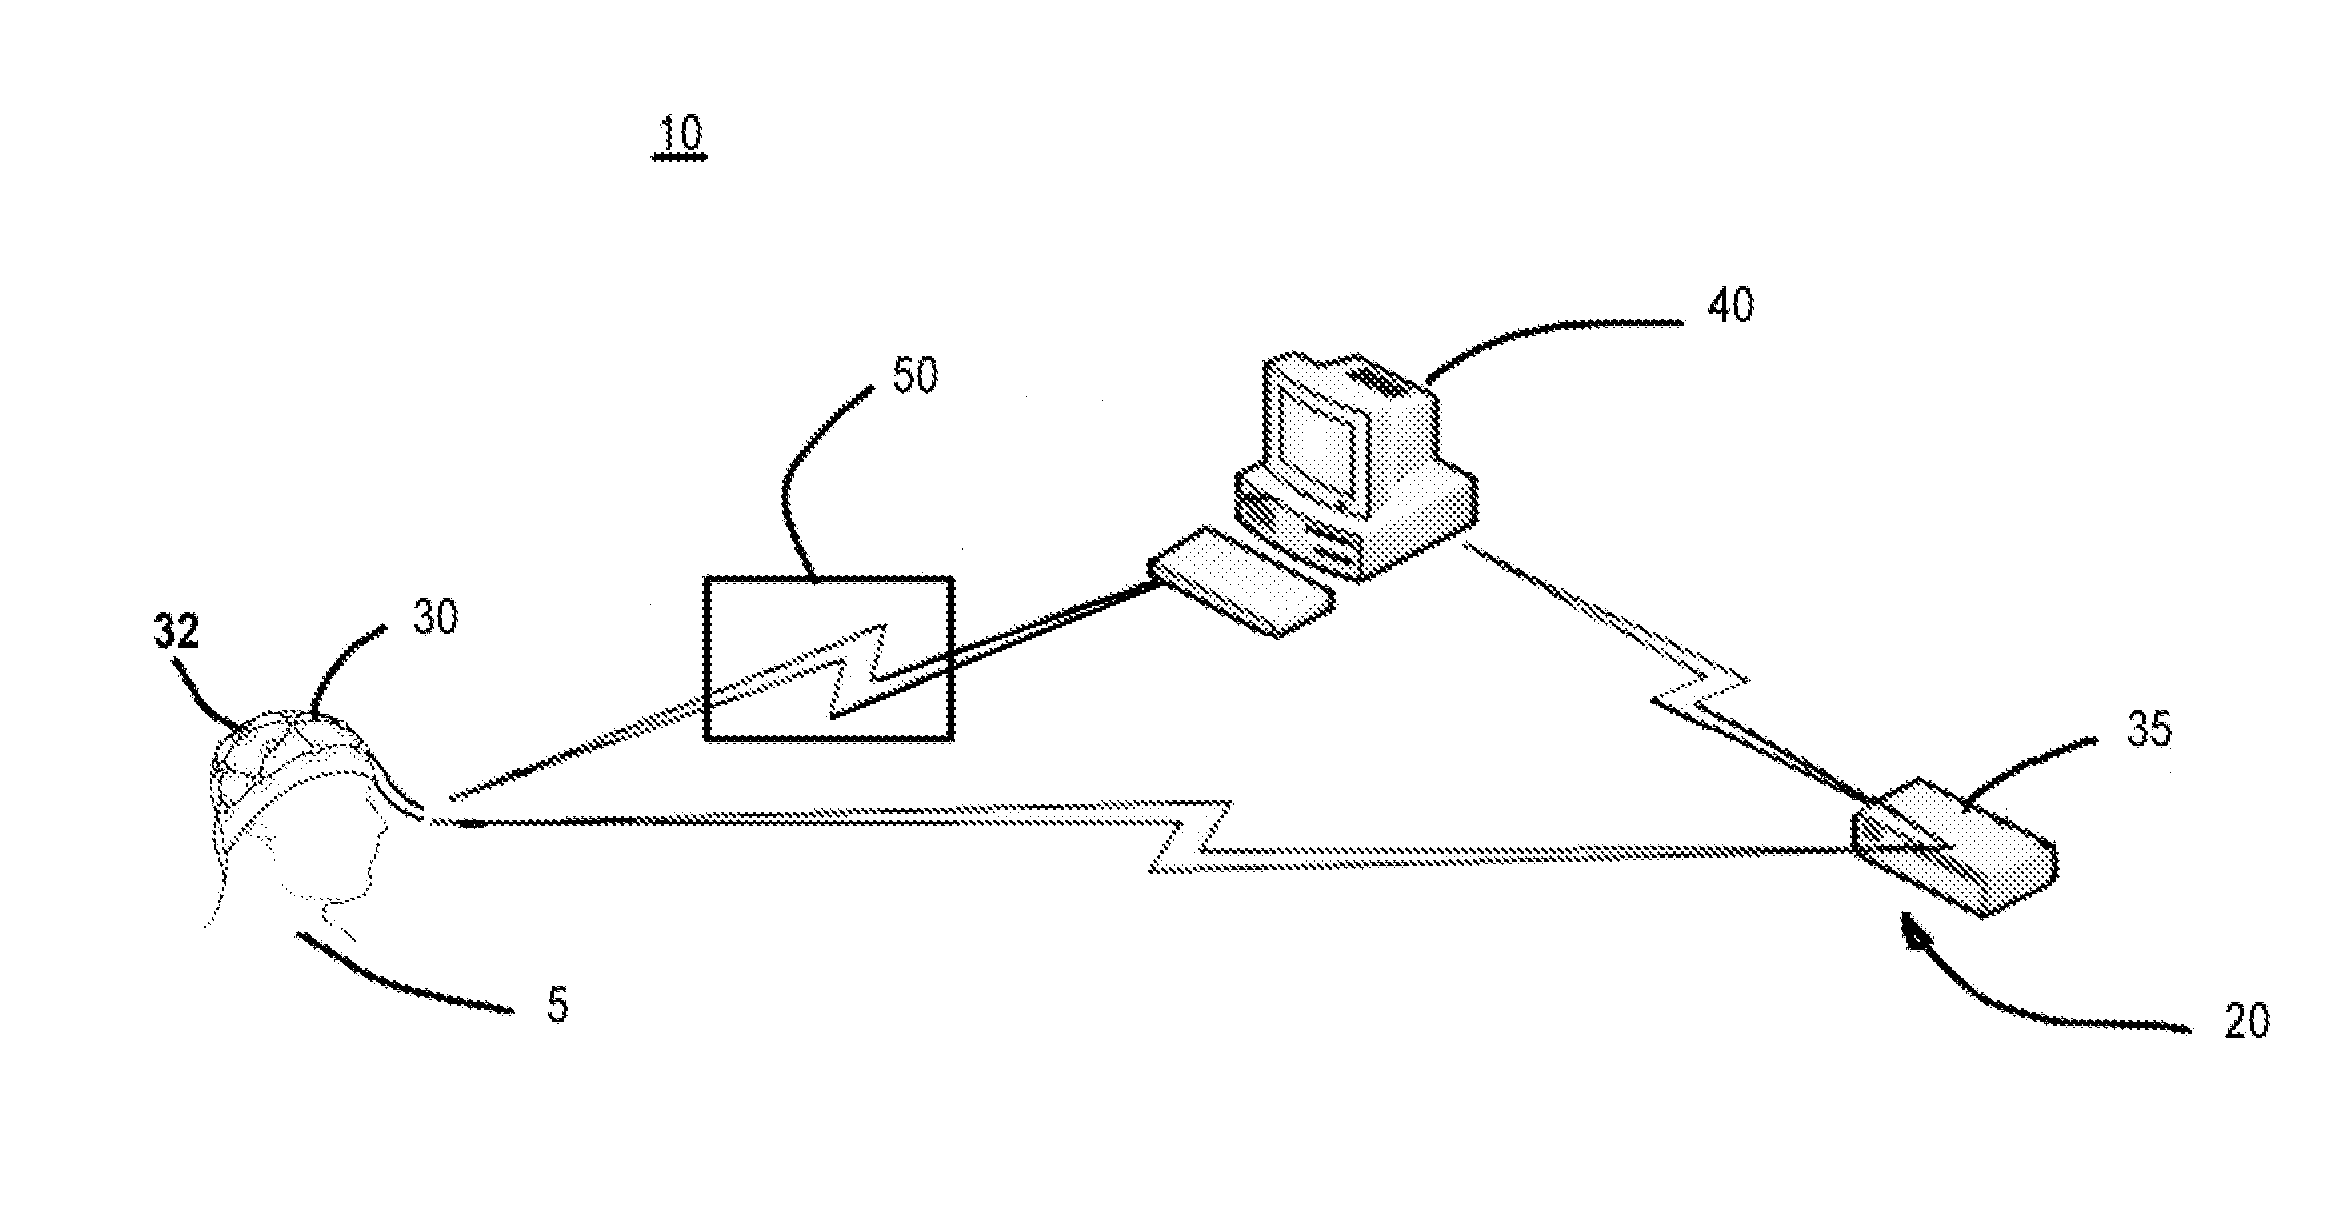 Method and Apparatus for Assessing Neurocognitive Status